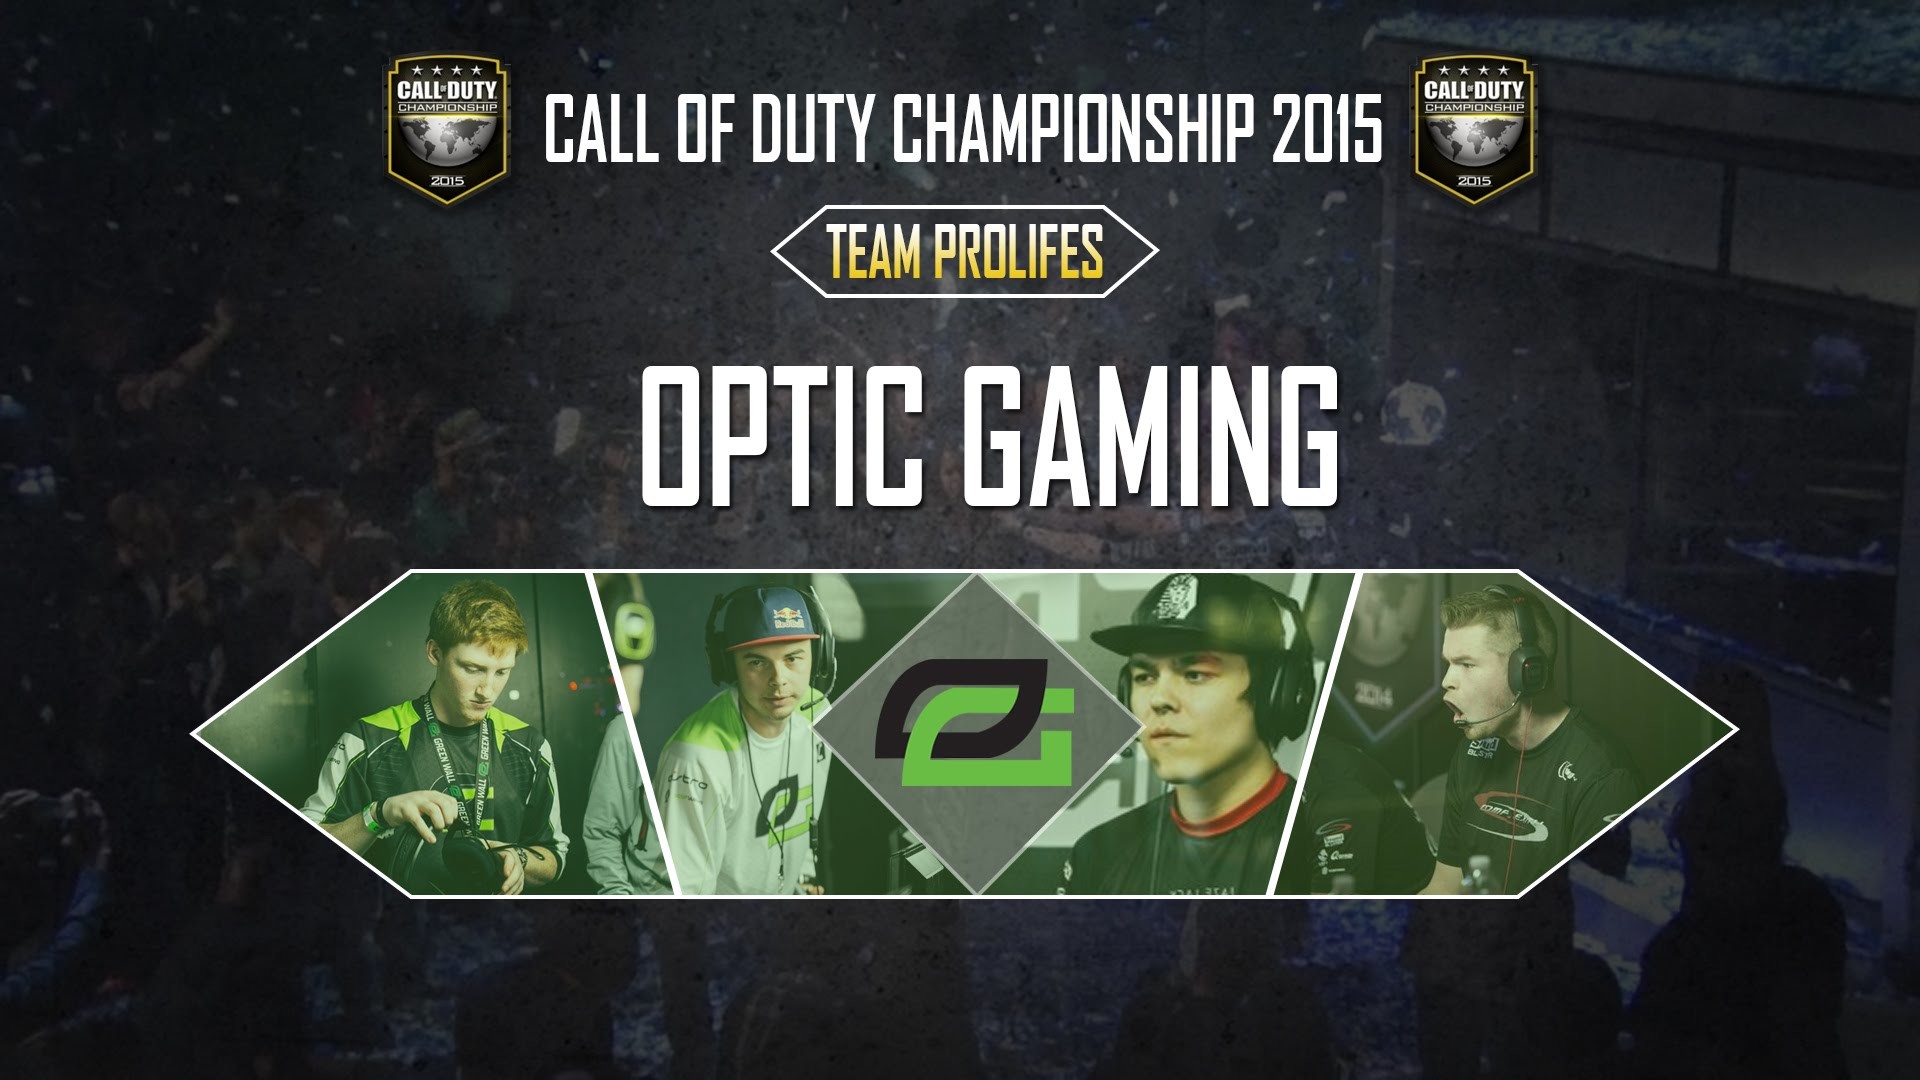 1920x1080 Call of Duty Championship 2015 | Team Profiles | OpTic Gaming - YouTube